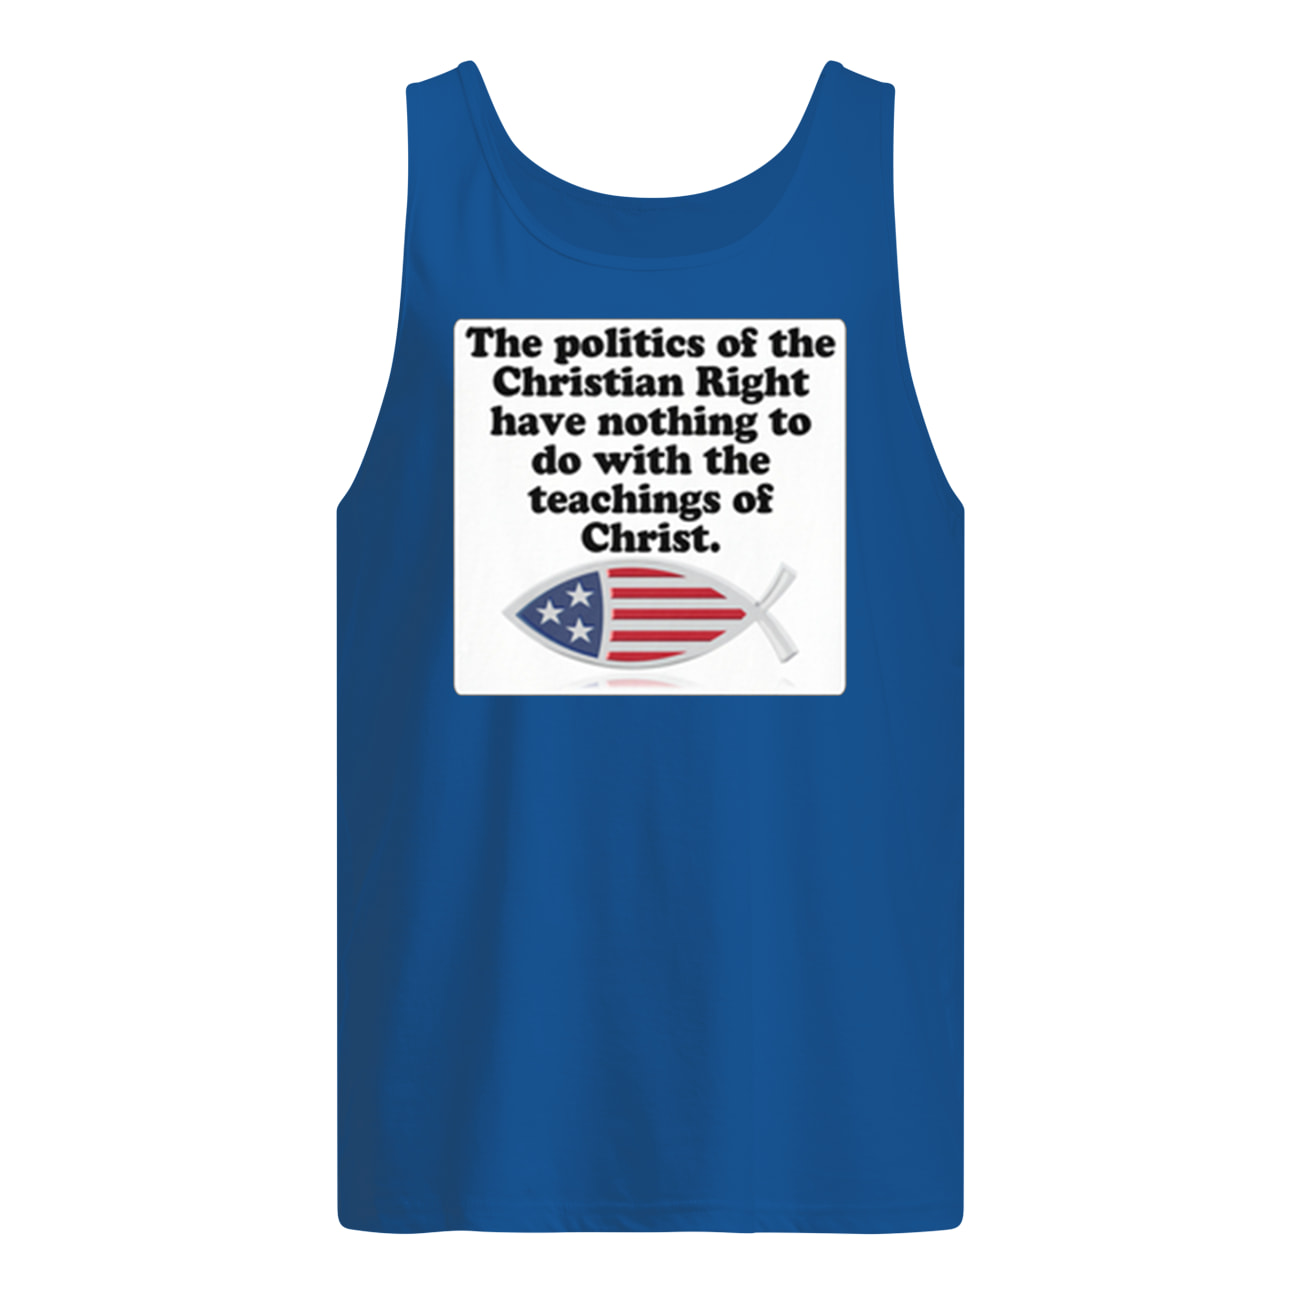 The poltics of the Christian right have nothing to do with the teaching of Christ tank top